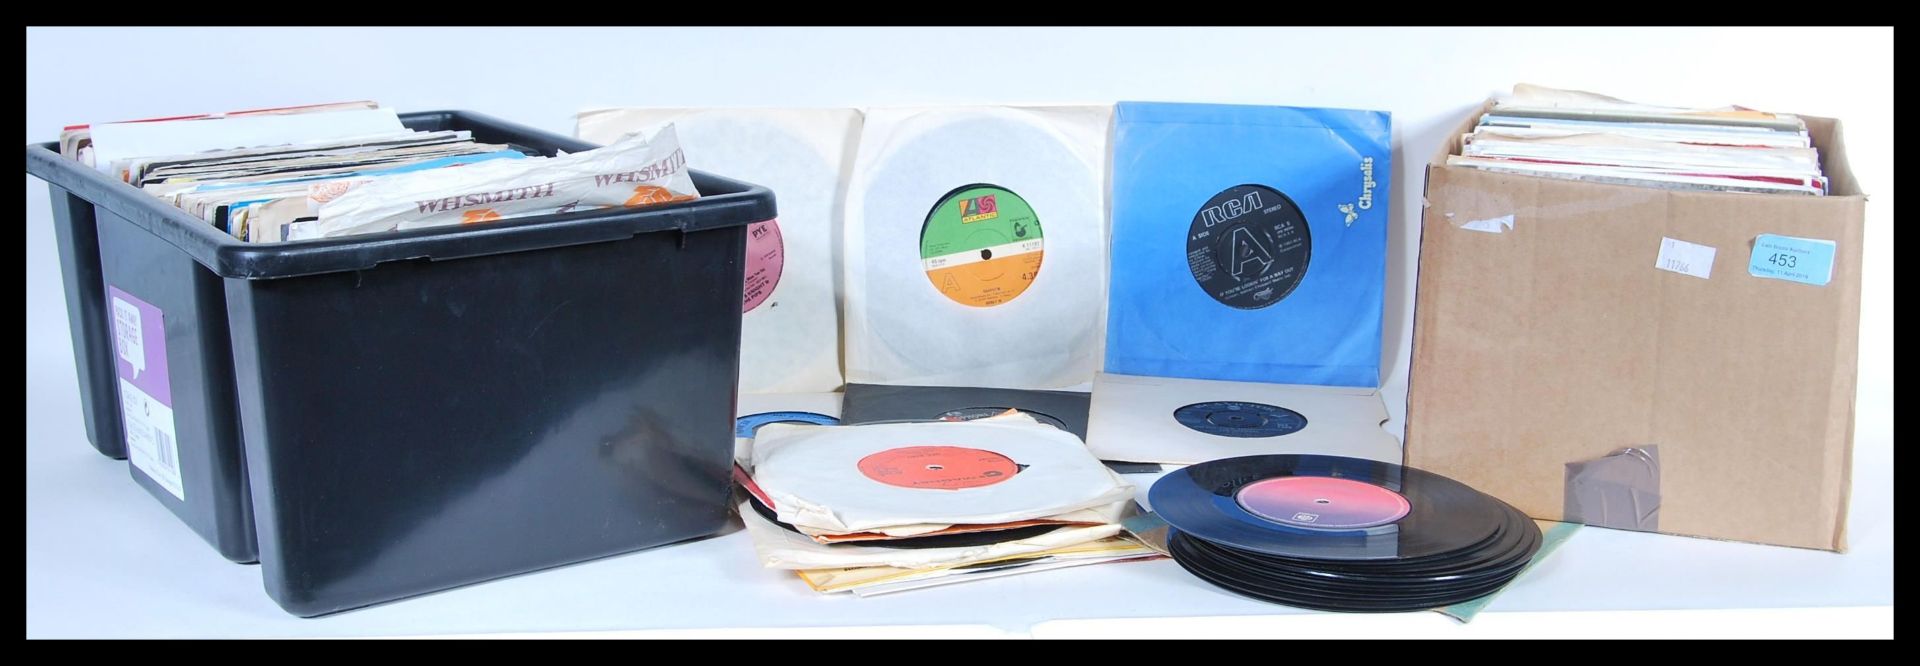 A good collection of 45rpm 7" vinyl singles featuring many different artists dating from the 1960's,